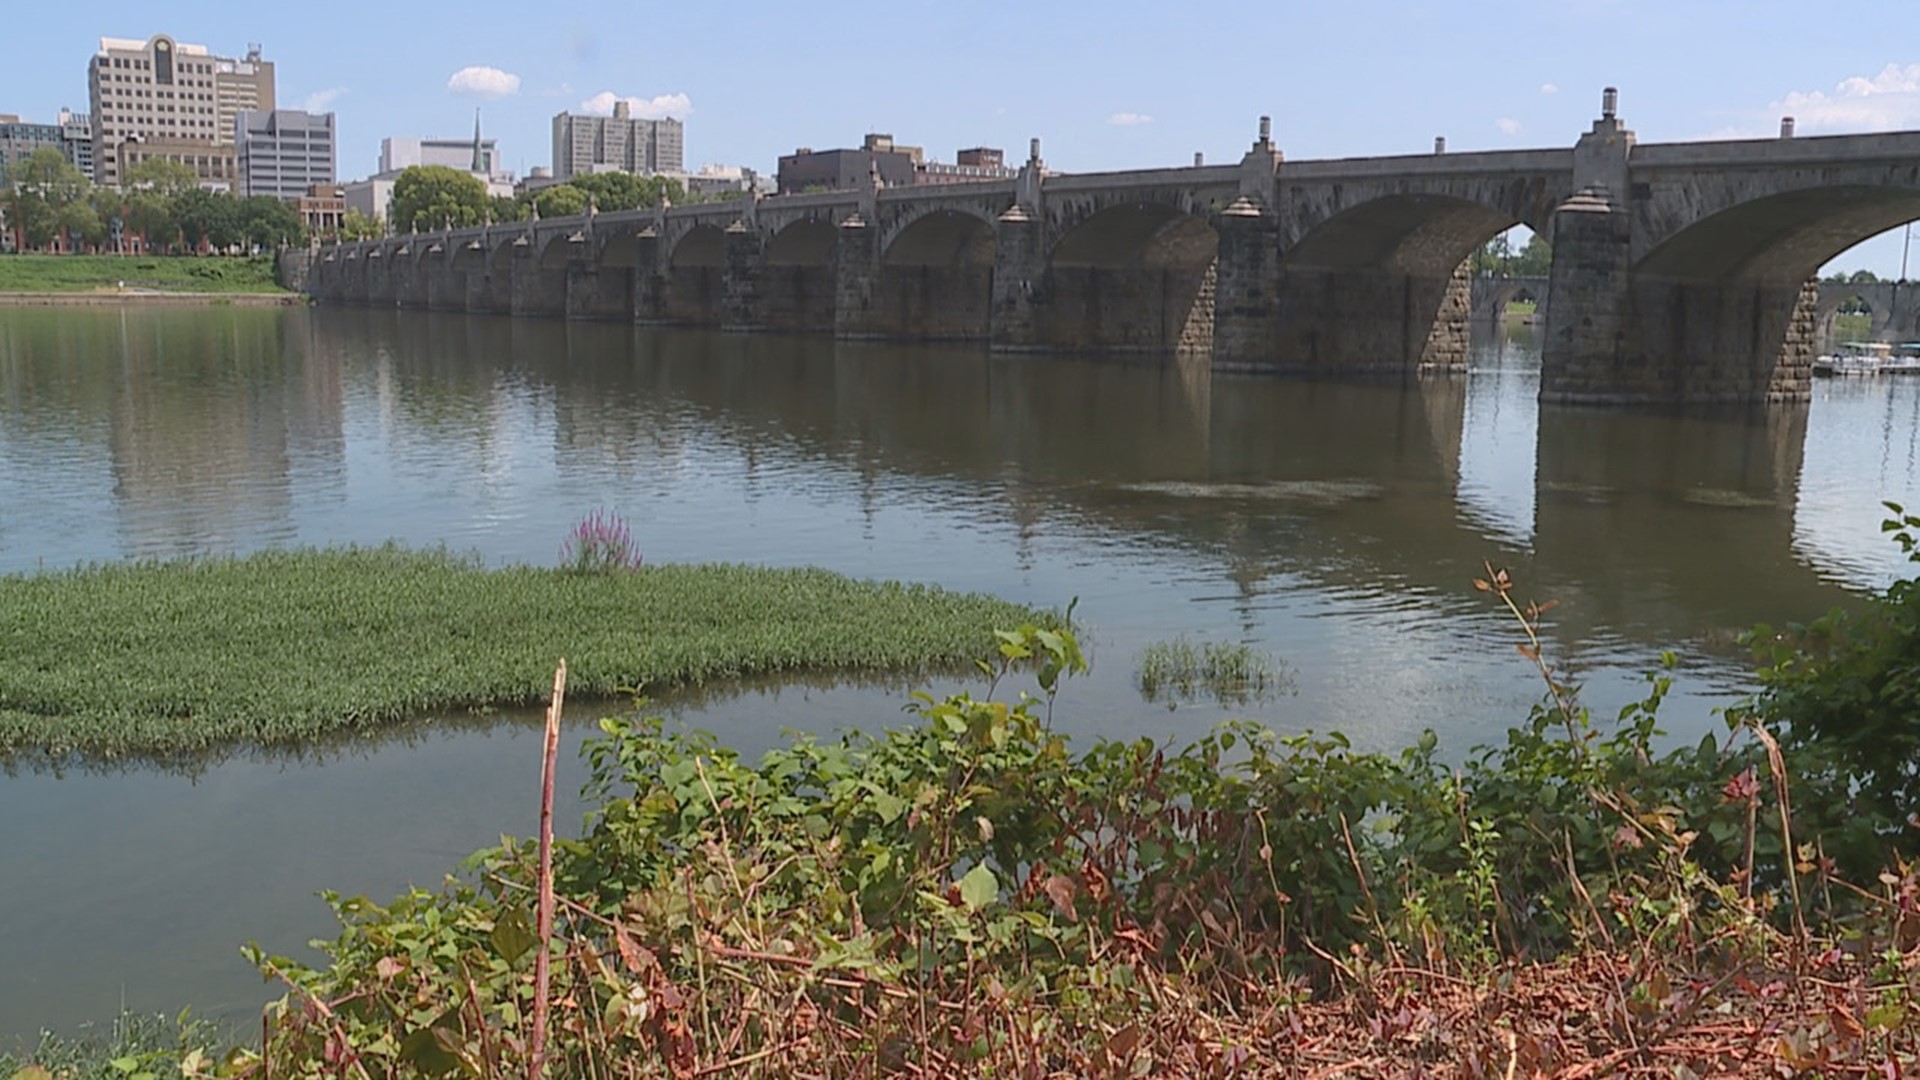 PennDOT officials announced the addition of a utility bridge as part of the Market Street Bridge's rehabilitation for cyclists and pedestrians.